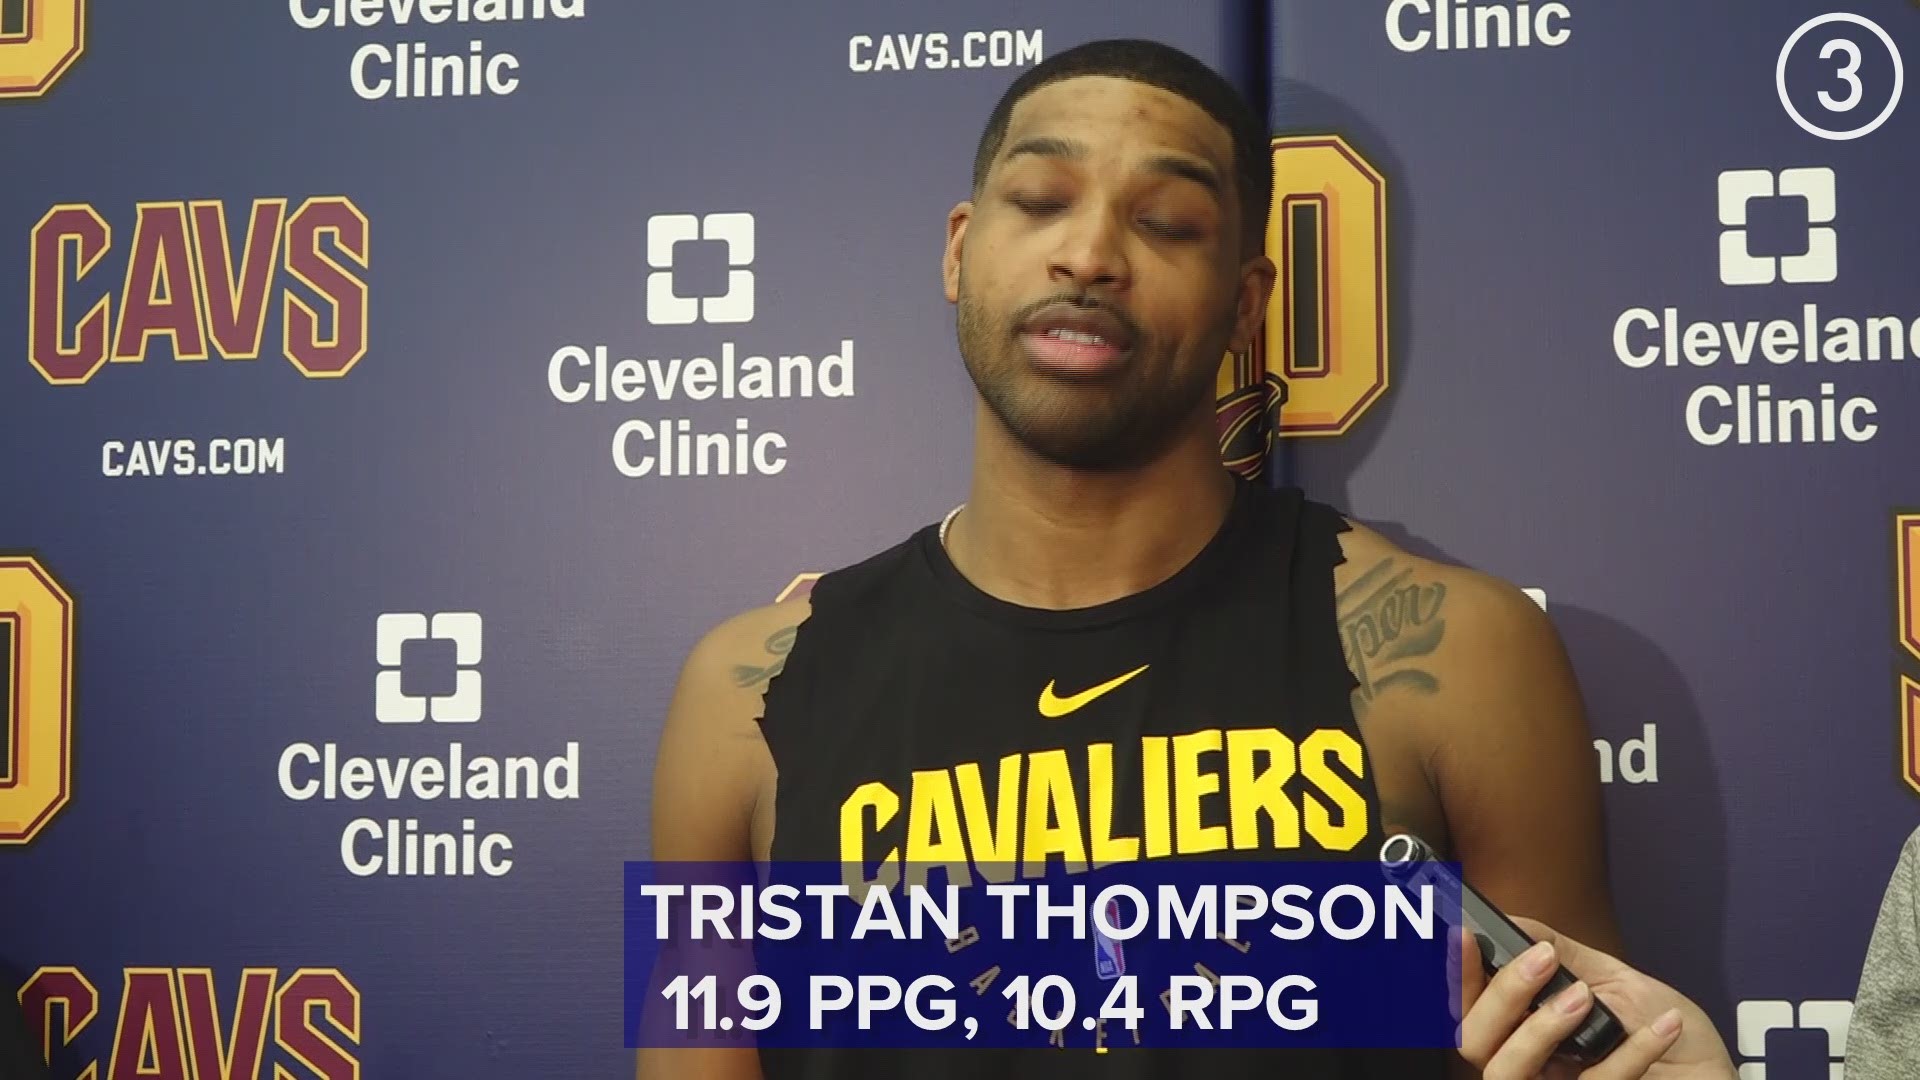 Speaking to reporters on Friday, Tristan Thompson described the Cleveland Cavaliers' acquisition of Andre Drummond as a 'steal.'  Drummond is a 2-time All-Star.